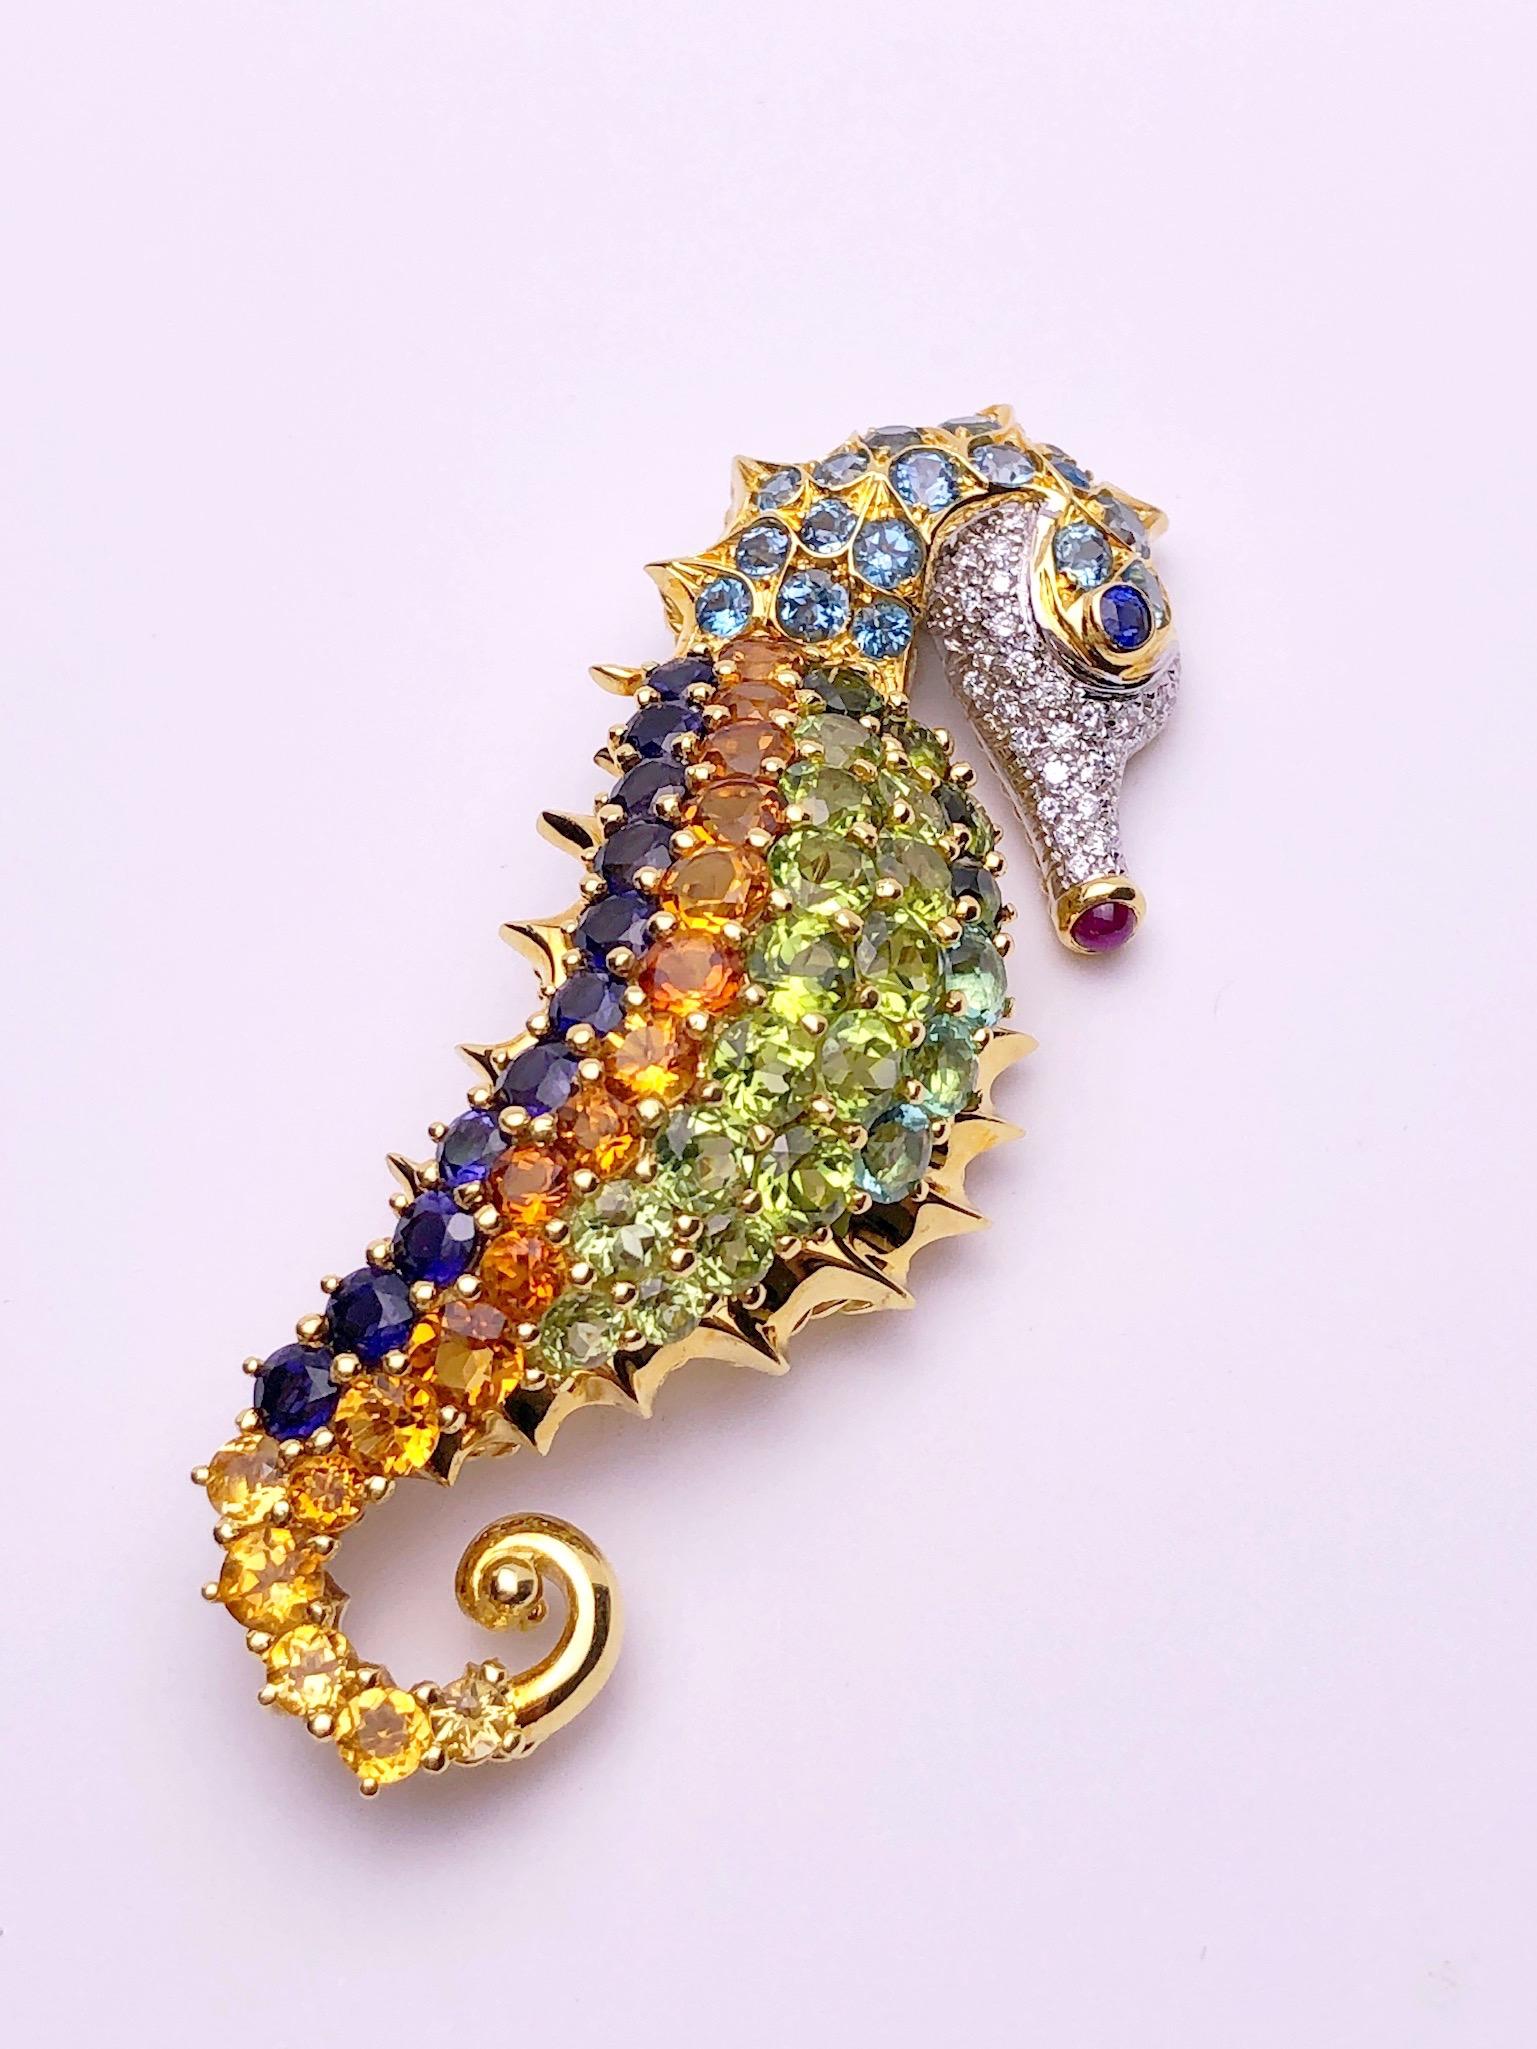 The seahorse is a symbol of luck and good fortune, an attribute of the sea. Considered to be a symbol of strength and power this seahorse brooch is the perfect example. Semi precious round stones in peridot, citrine, iolite and blue topaz are set in